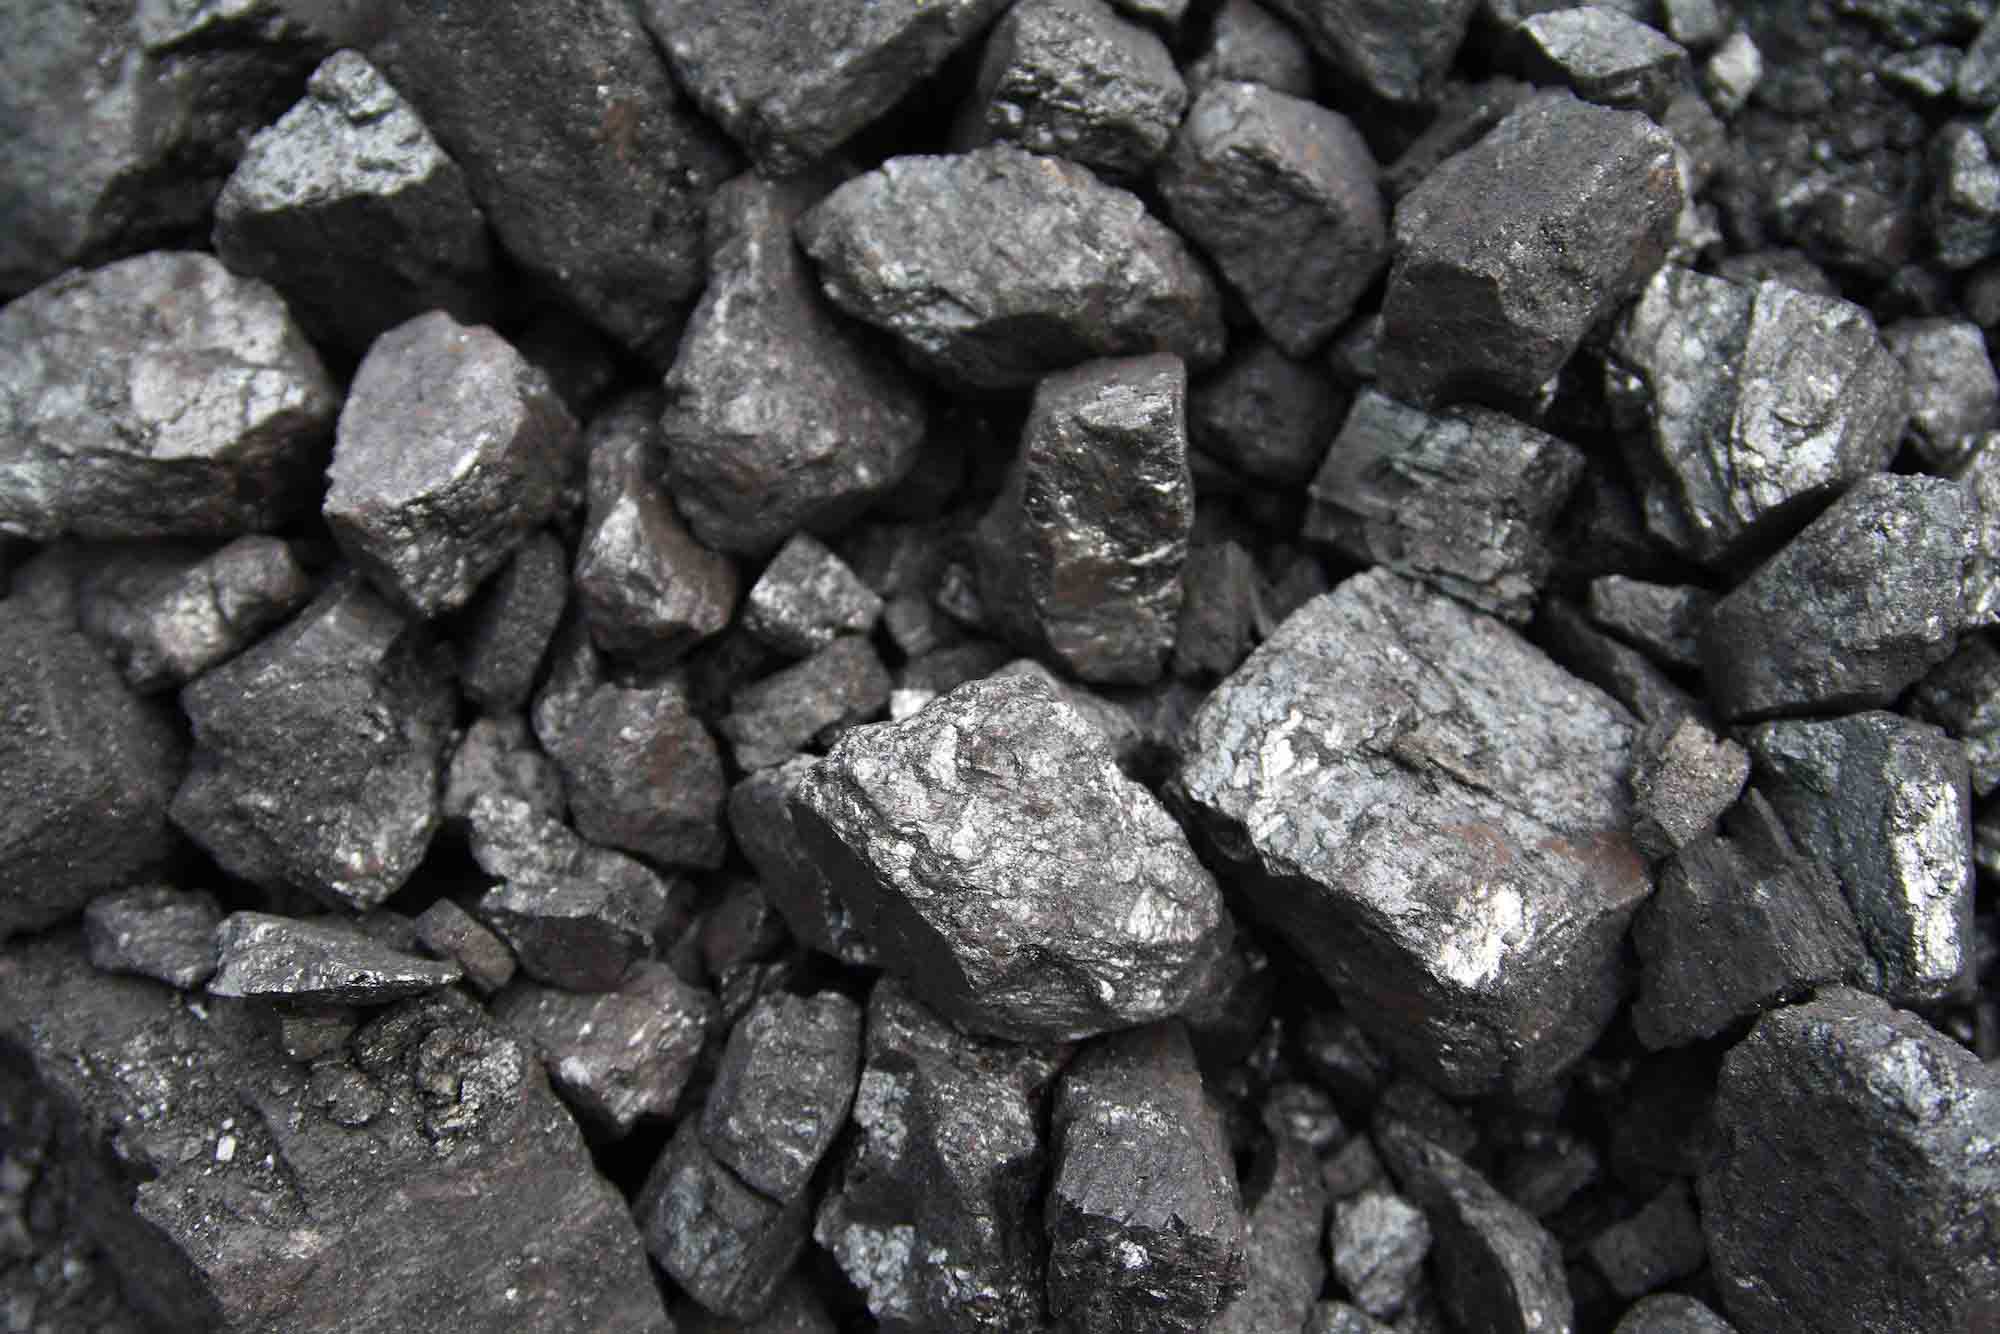 Coal as a Fossil Fuel